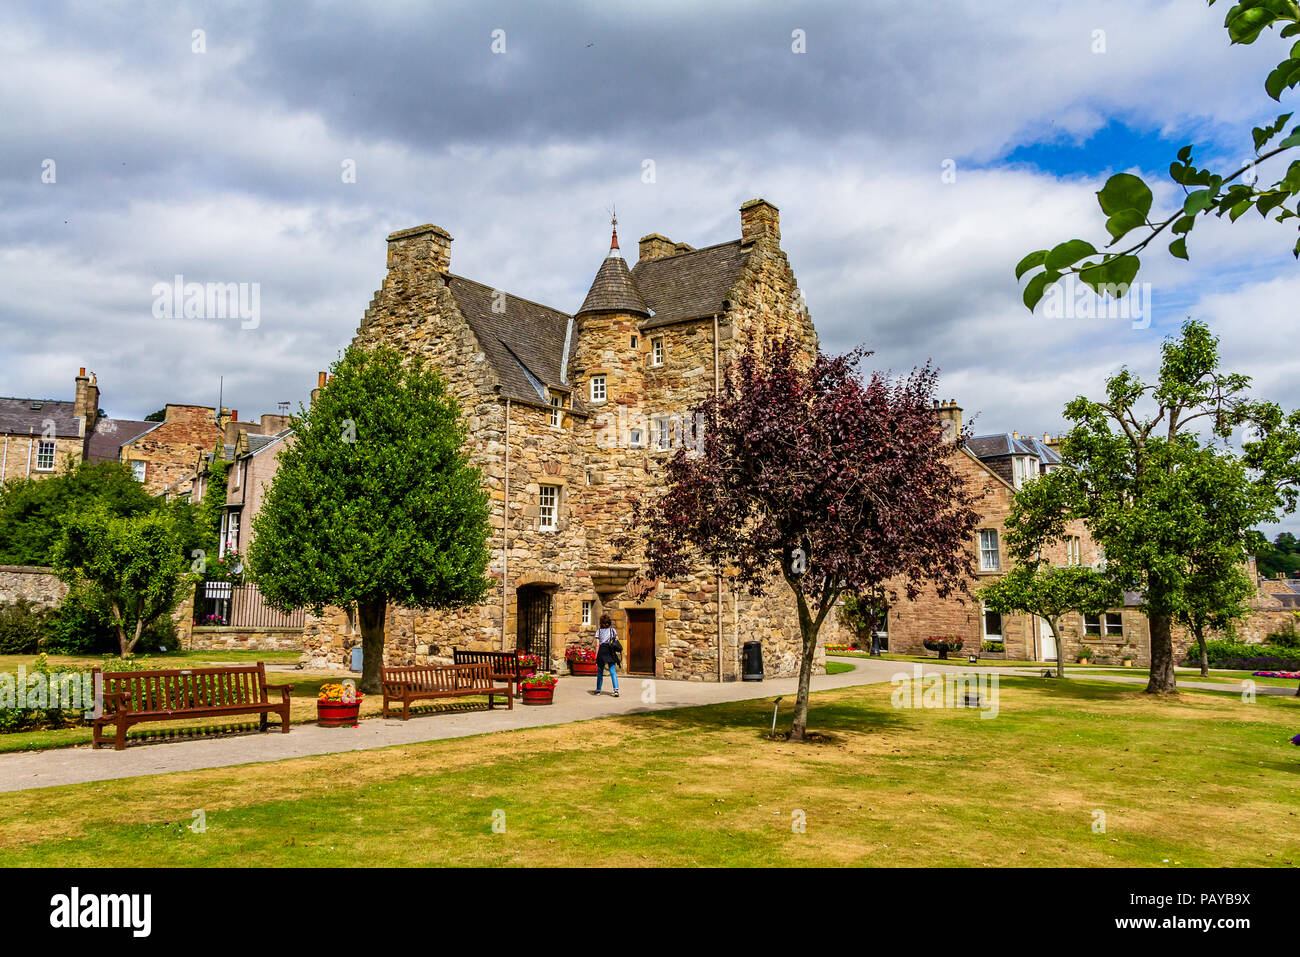 The fortified house in Jedburgh where Mary Queen of Scots once stayed, now the Mary Queen of Scots Visitor Centre. Jedburgh, Scotland Stock Photo